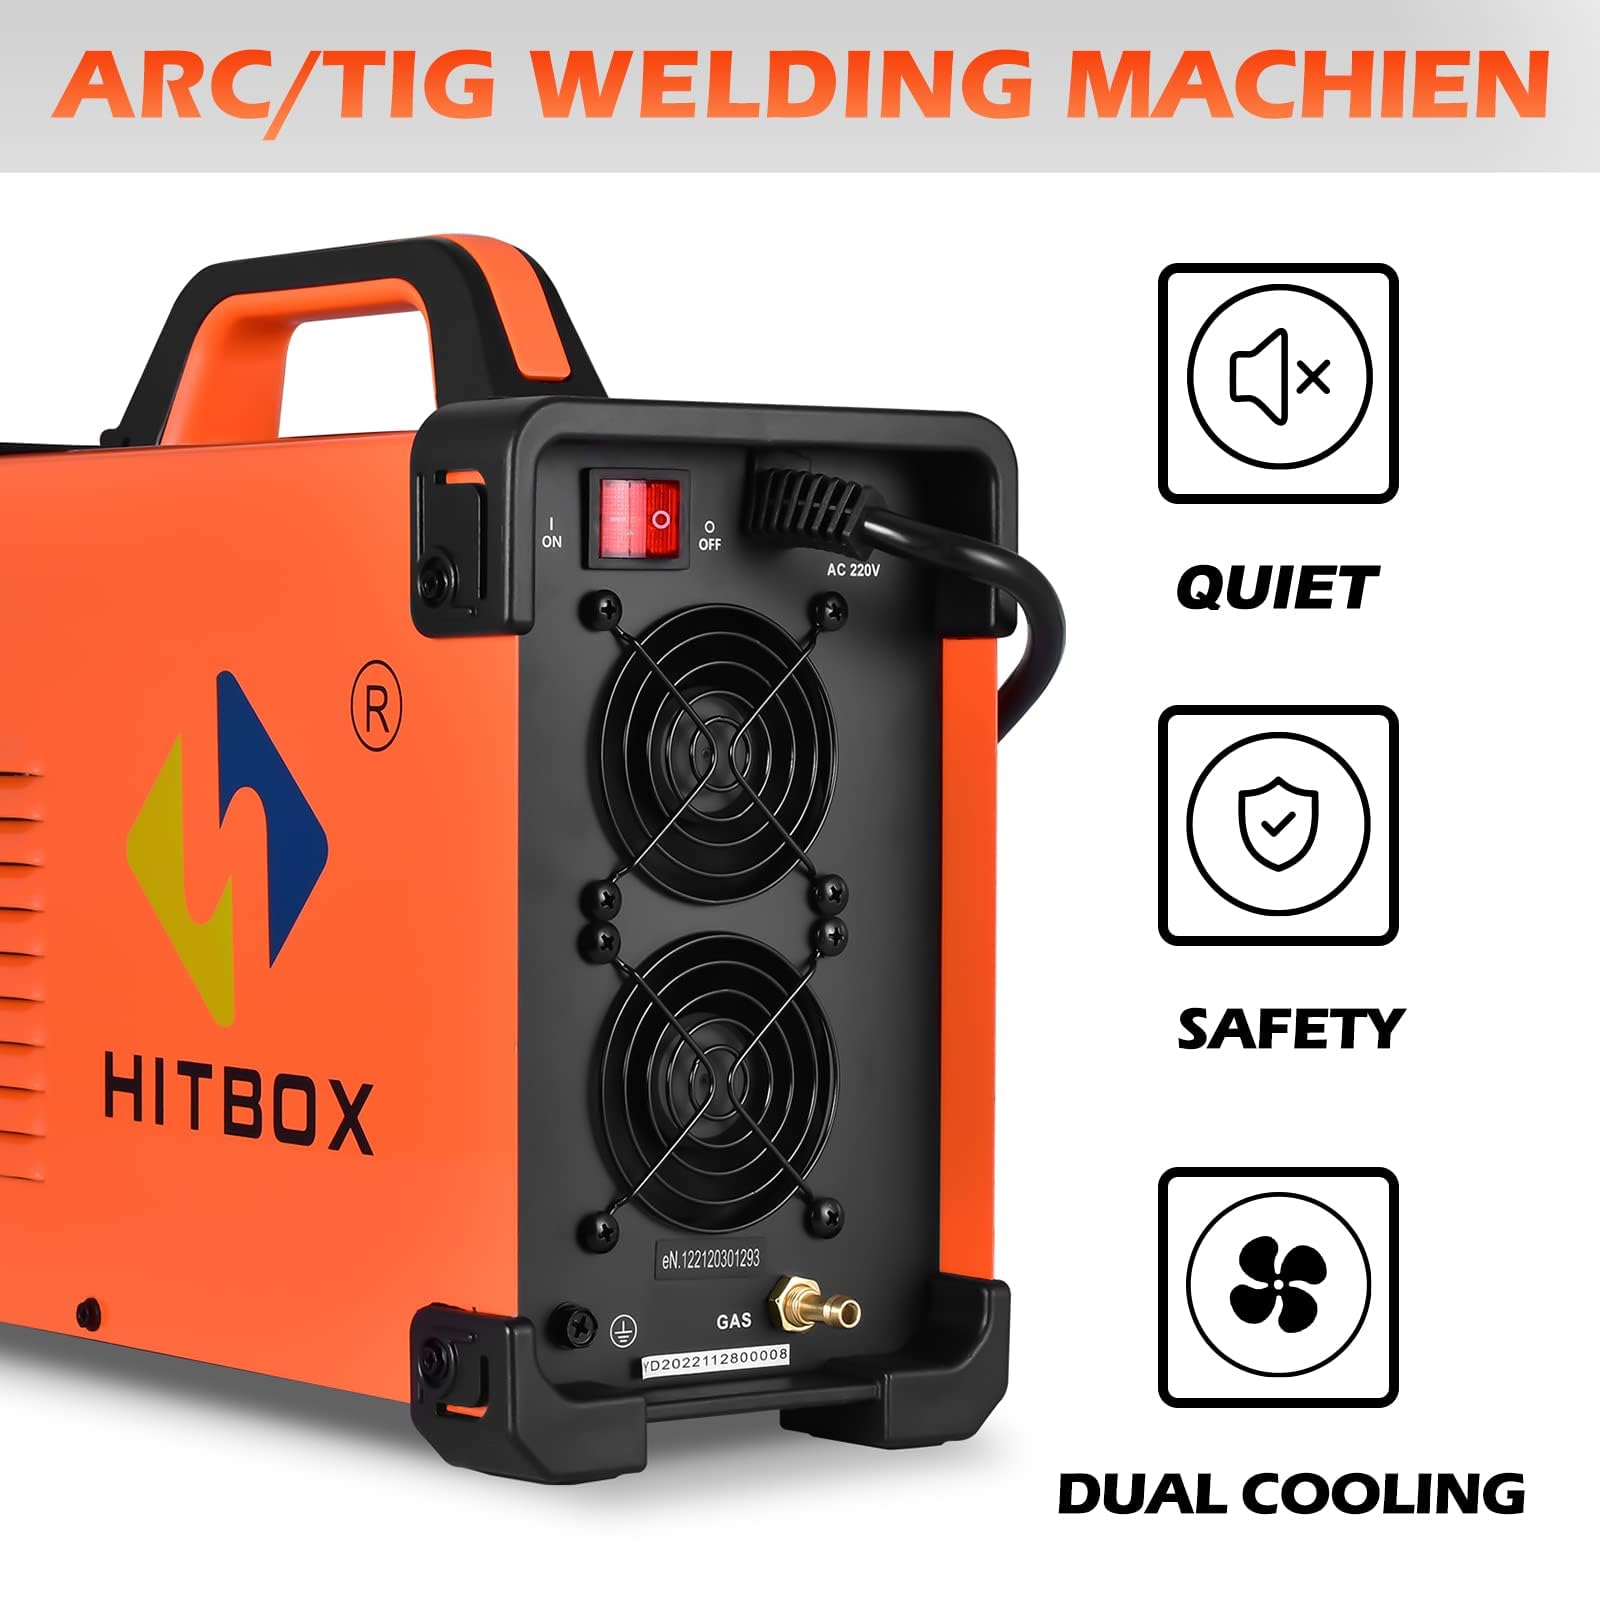 HITBOX 200A TIG Welder,AC/DC TIG Welder With Pulse 4 IN 1 Welding Machine,Aluminum TIG Welder 220V with DC TIG/AC TIG/Pulse TIG/Stick and IGBT 2T/4T LED Digital Display,Compatible with Foot Pedal